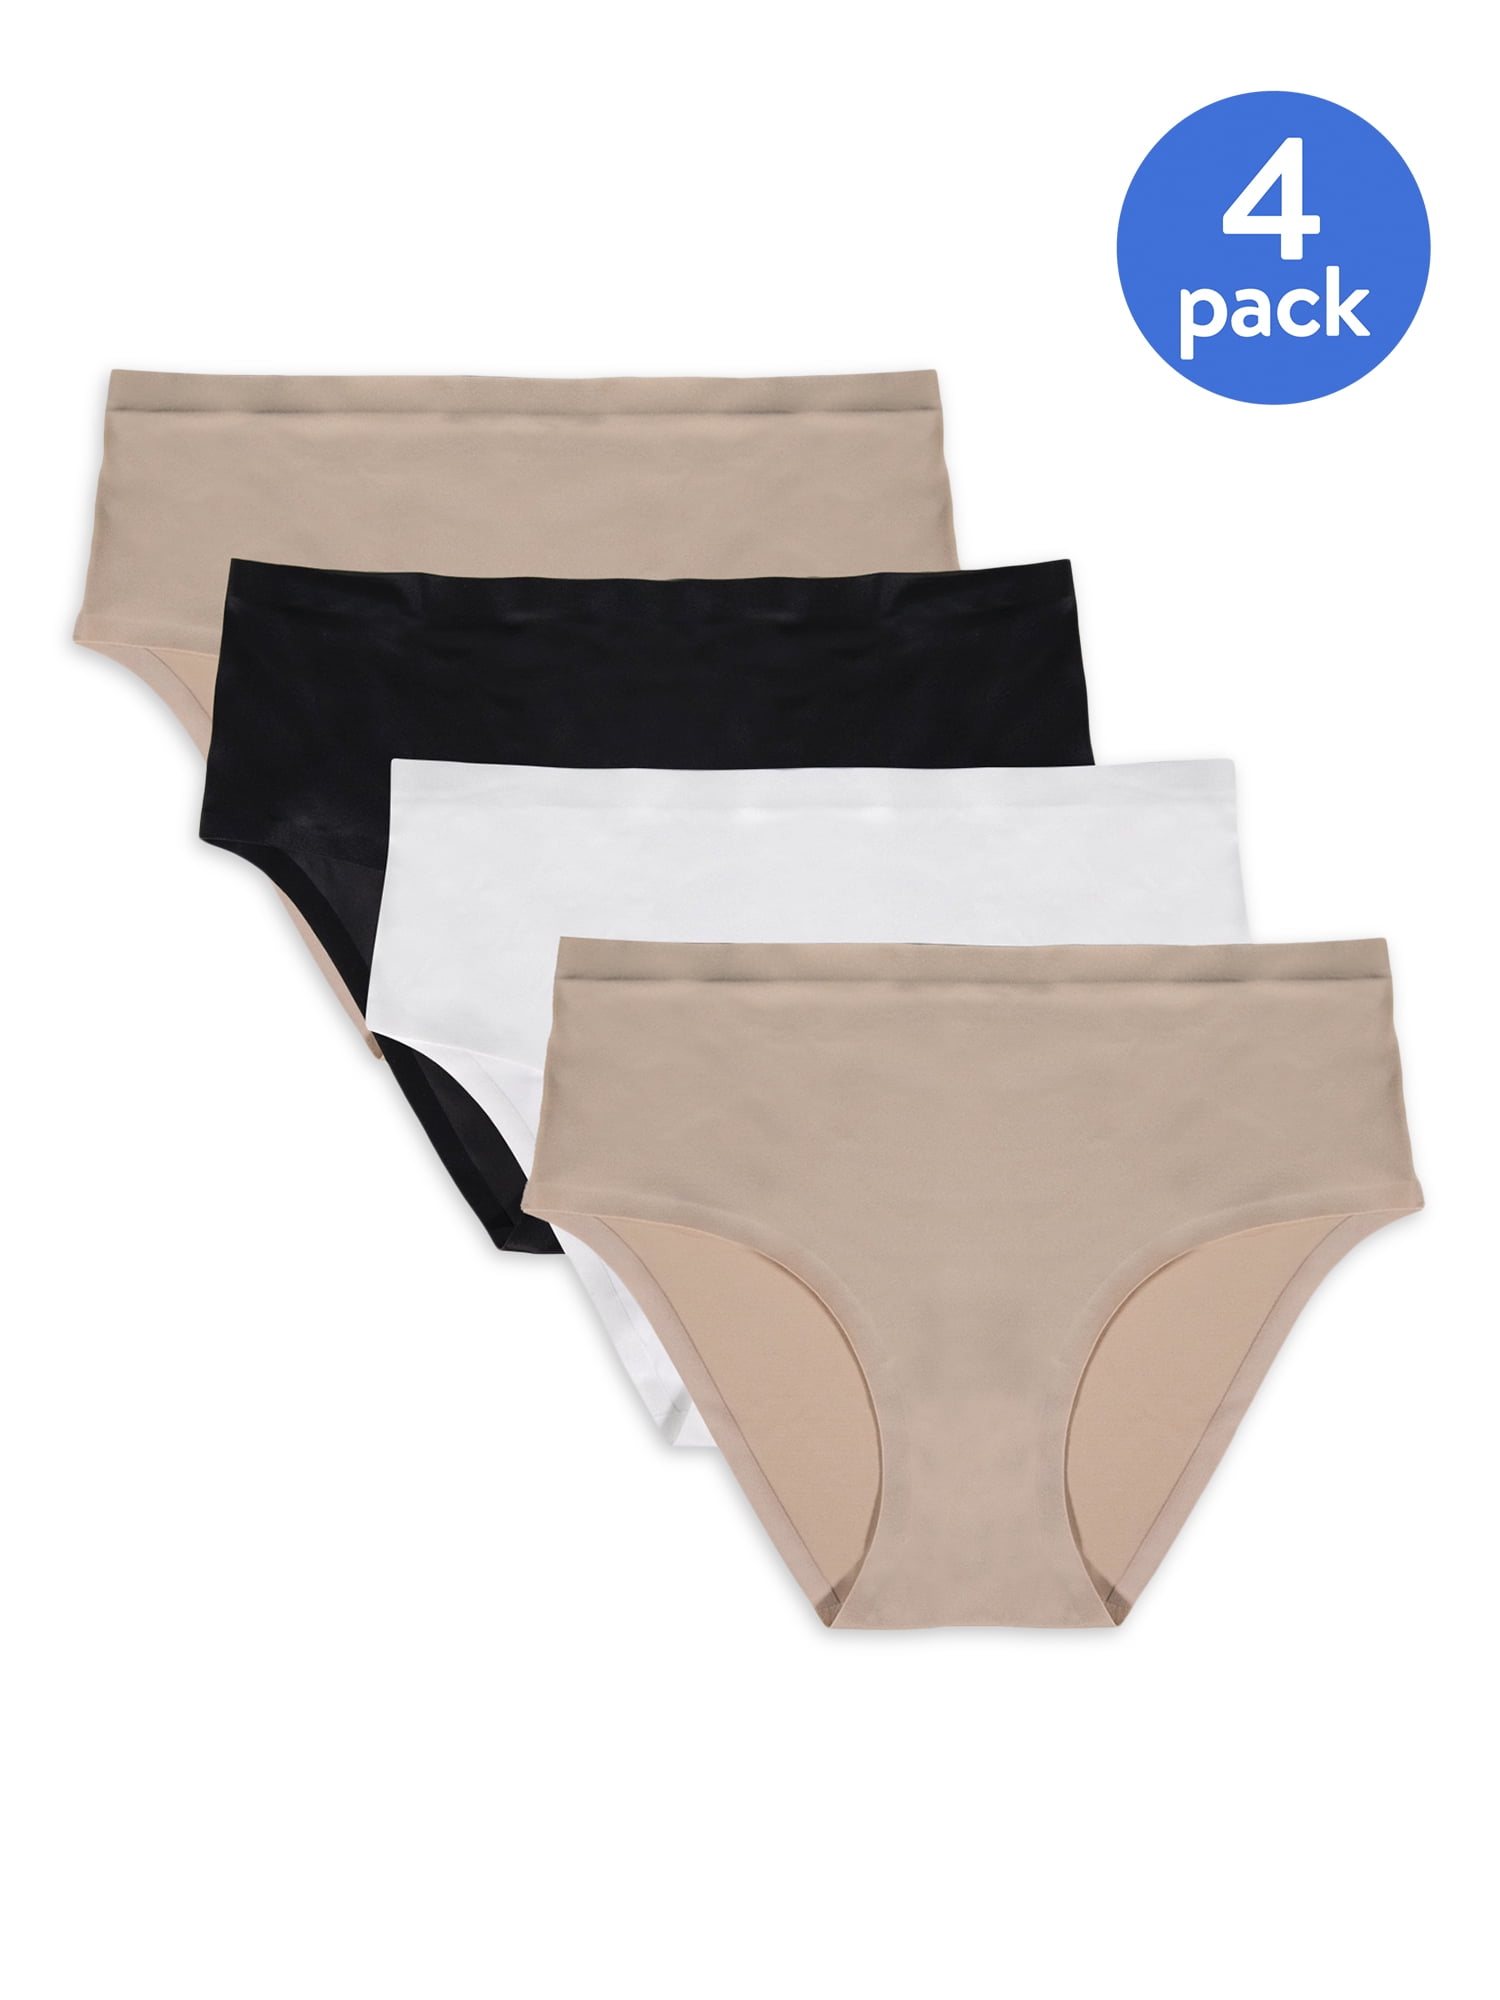 Details about   Women's 3 Pack Plain White Soft Comfort Fabric Mama Briefs Underwear Knickers 